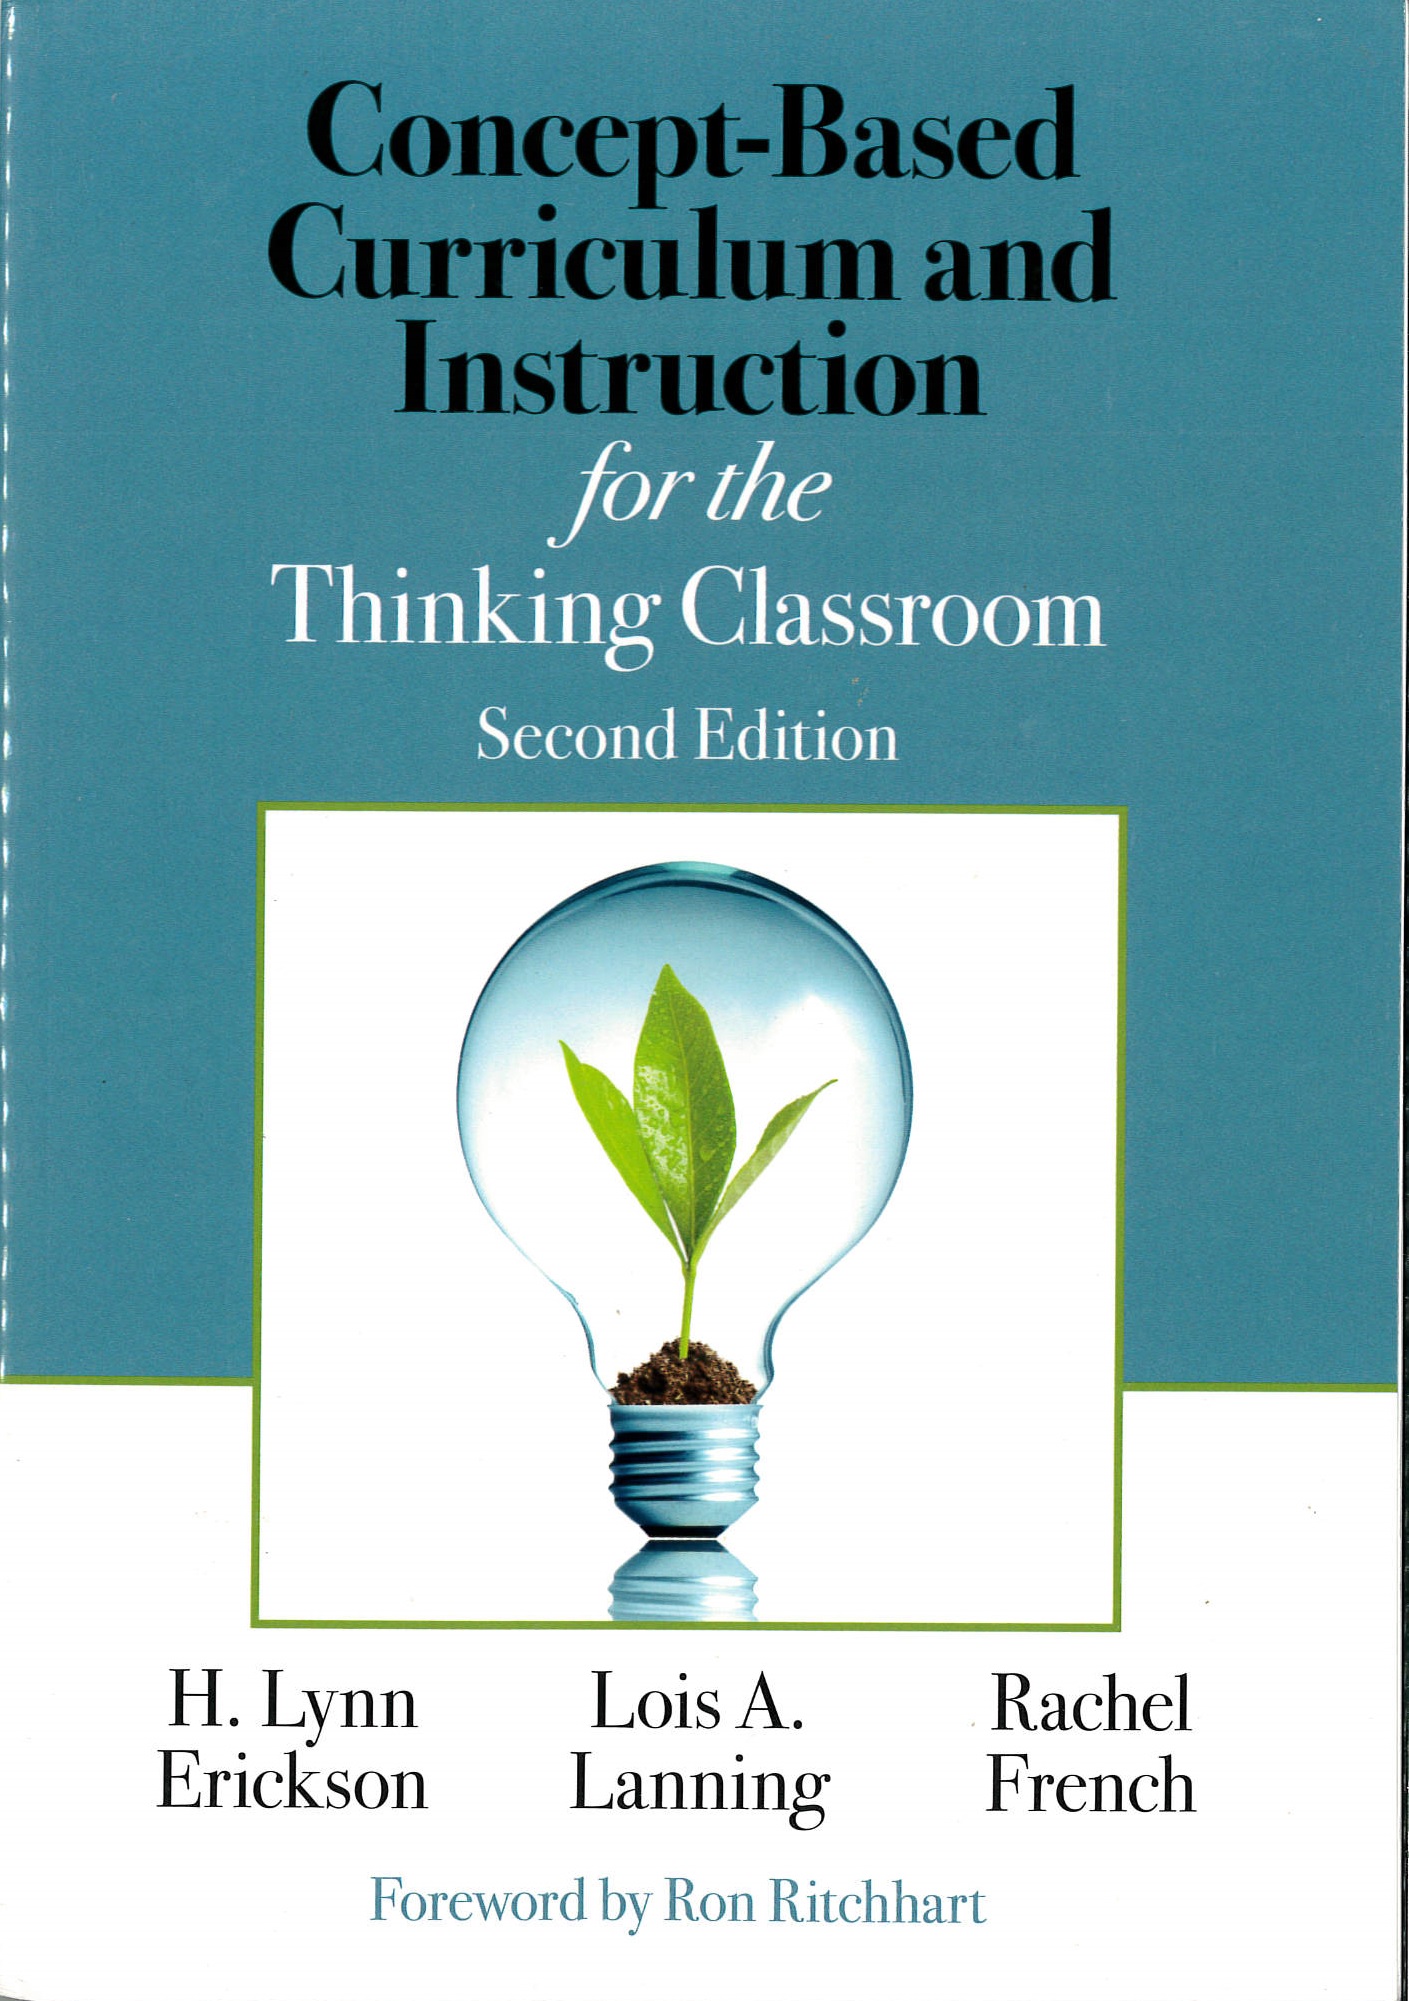 Concept-based curriculum and instruction for the thinking classroom